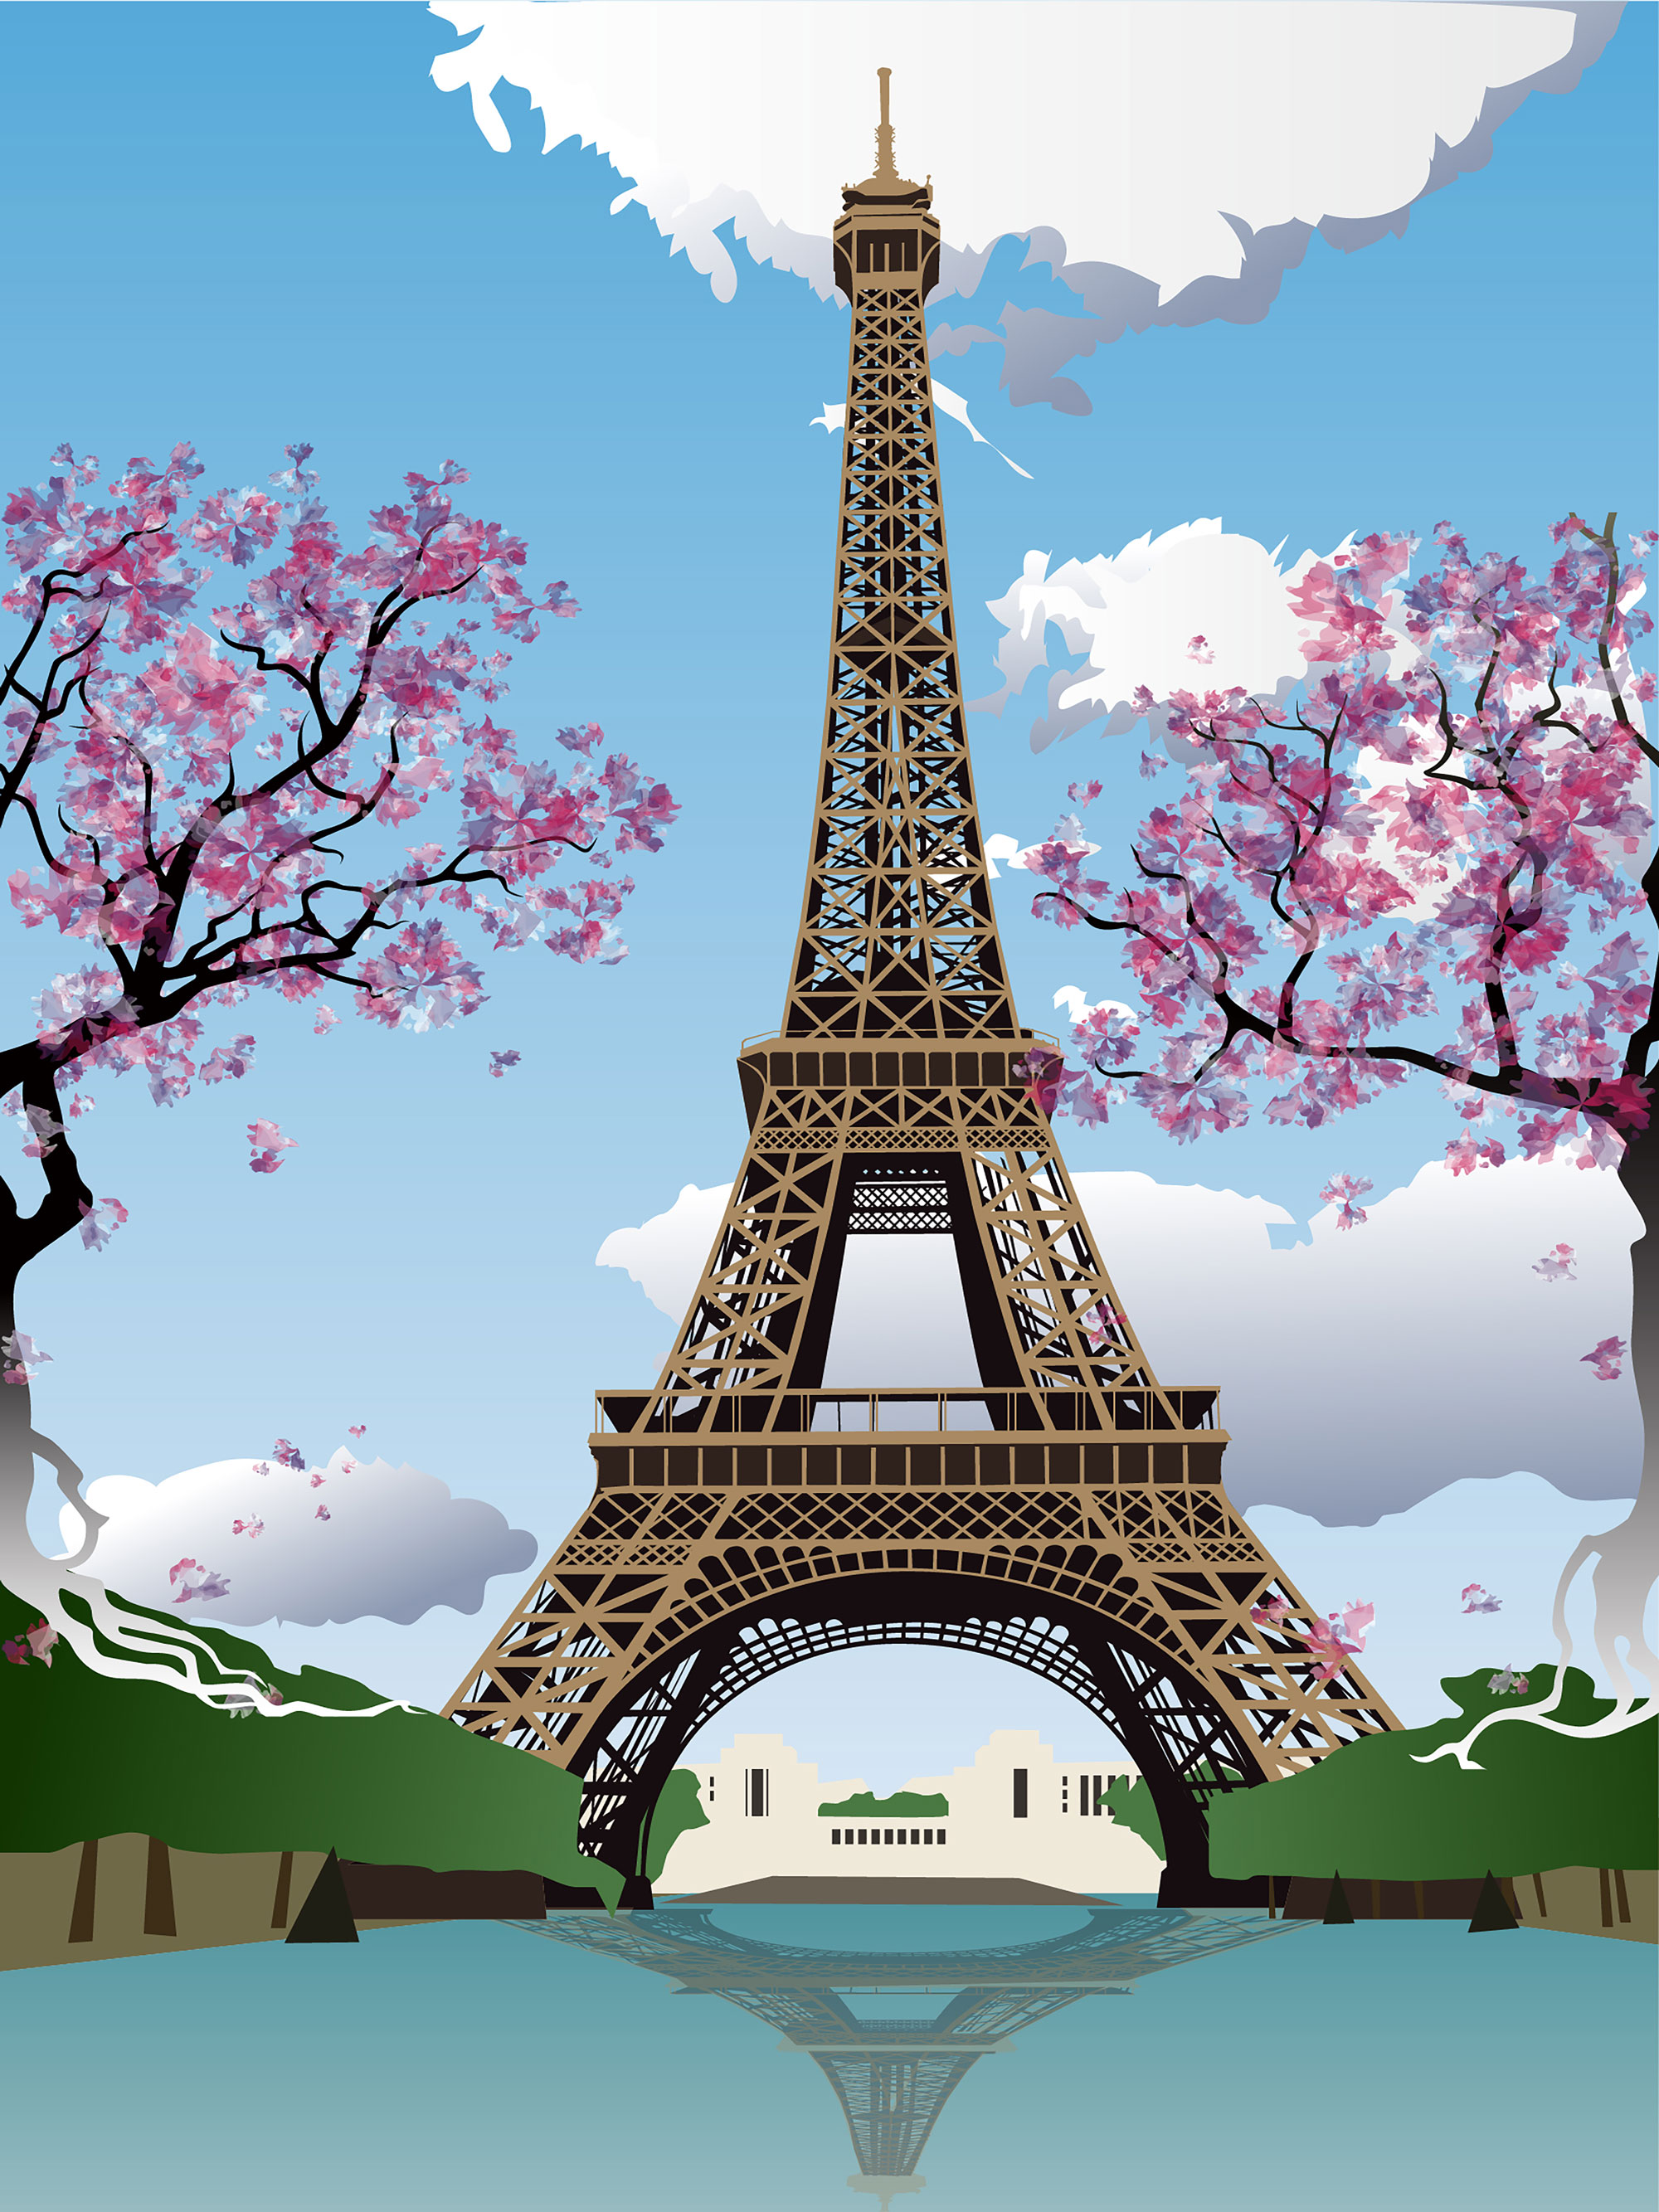 

Eiffel Tower Paris Flowers Trees Vinyl Photography Backdrops Blue Sky Clouds Photo Booth Backgrounds for Children Studio Props